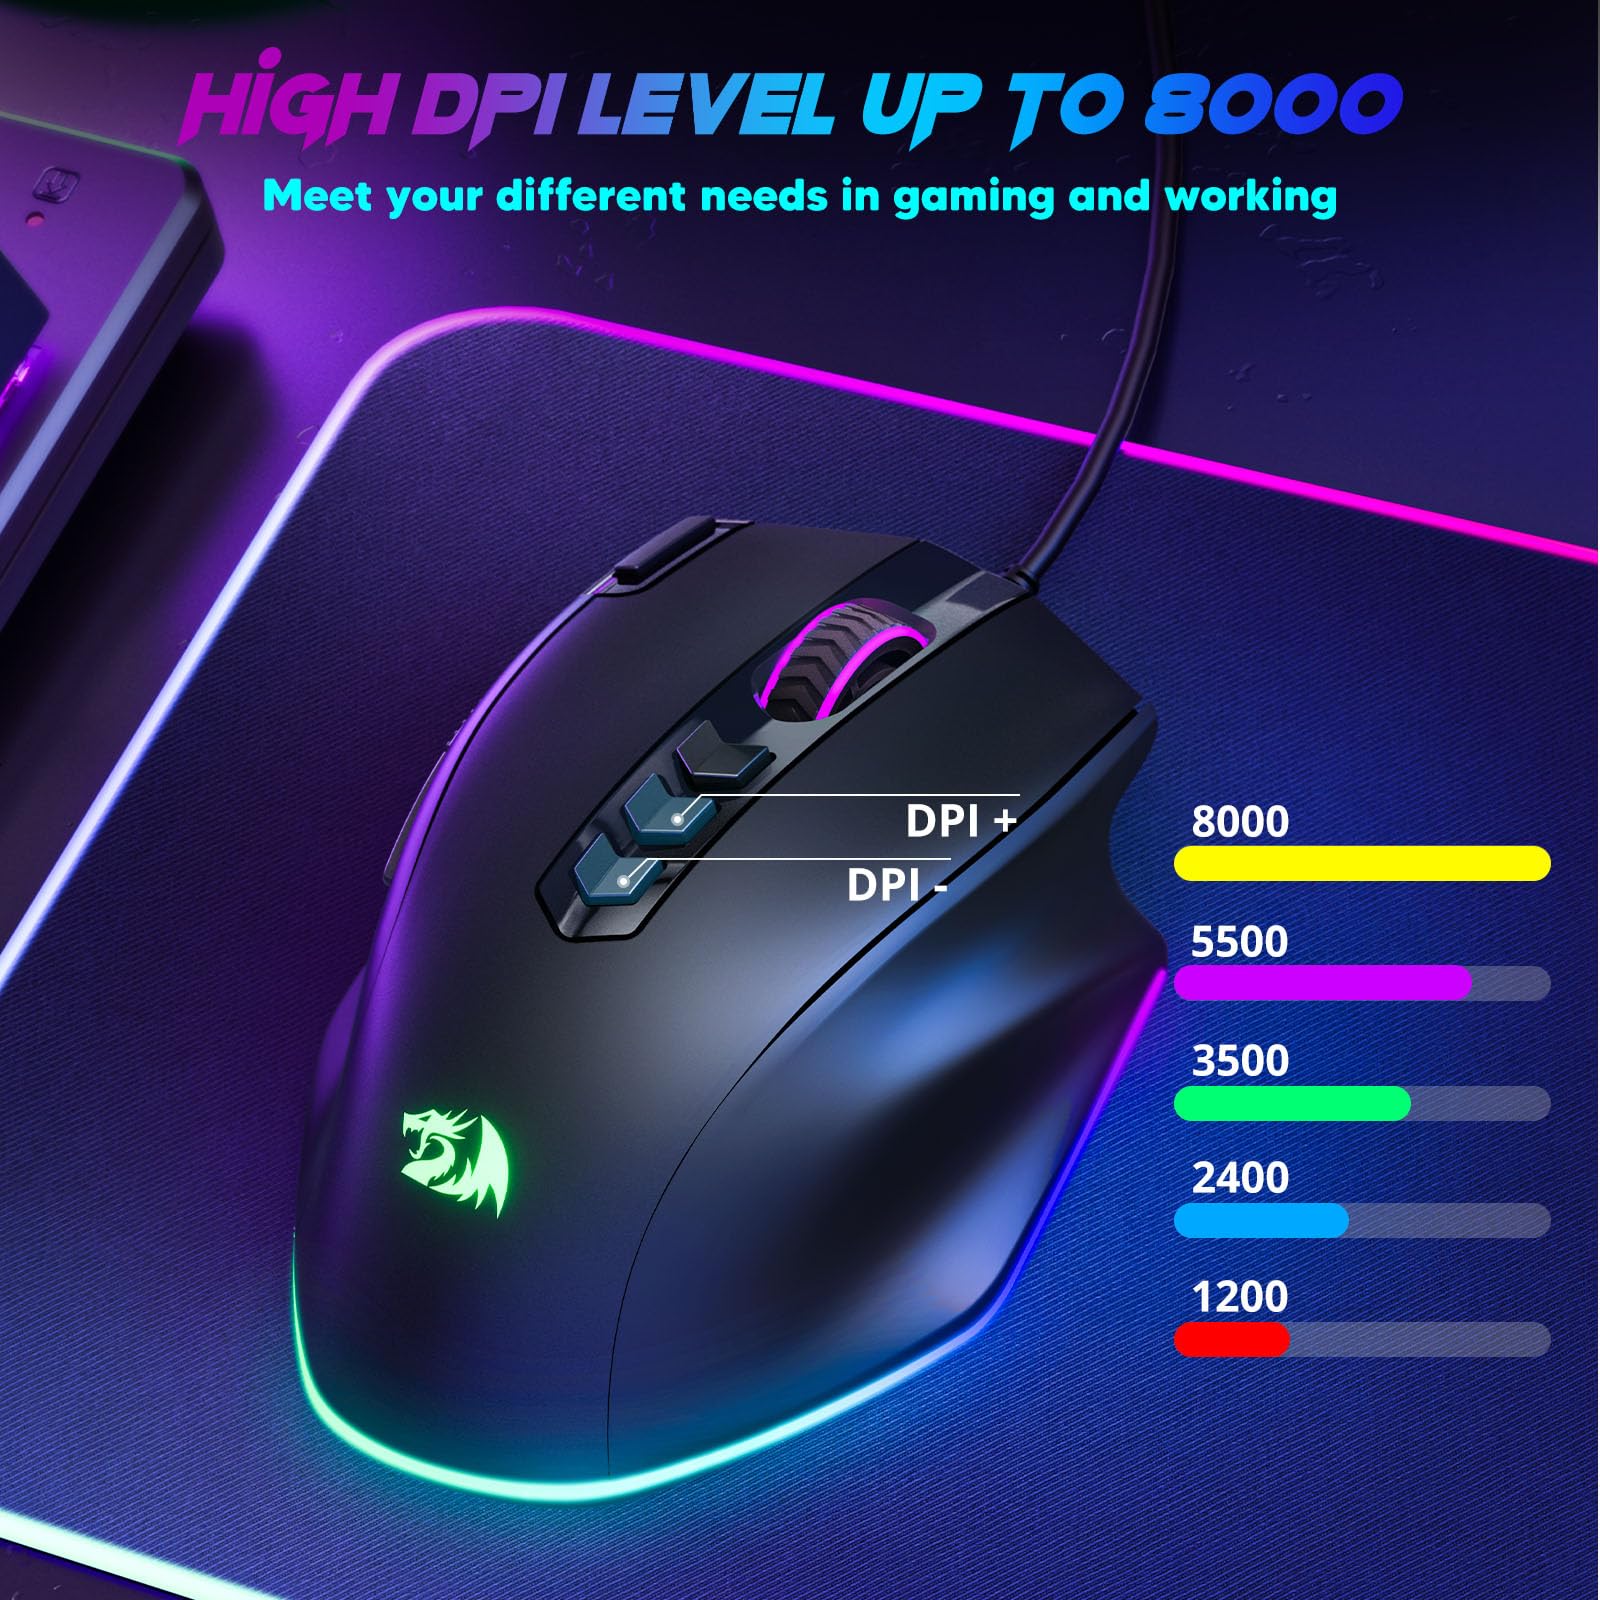 Redragon Wired Gaming Mouse, RGB Backlit Ergonomic Gamer Mouse Up to 8000 DPI, 11 Programmable Buttons & 7 Backlit Modes, Extra Sniper Button, Mouse Gamer for Windows PC Gamers, M614